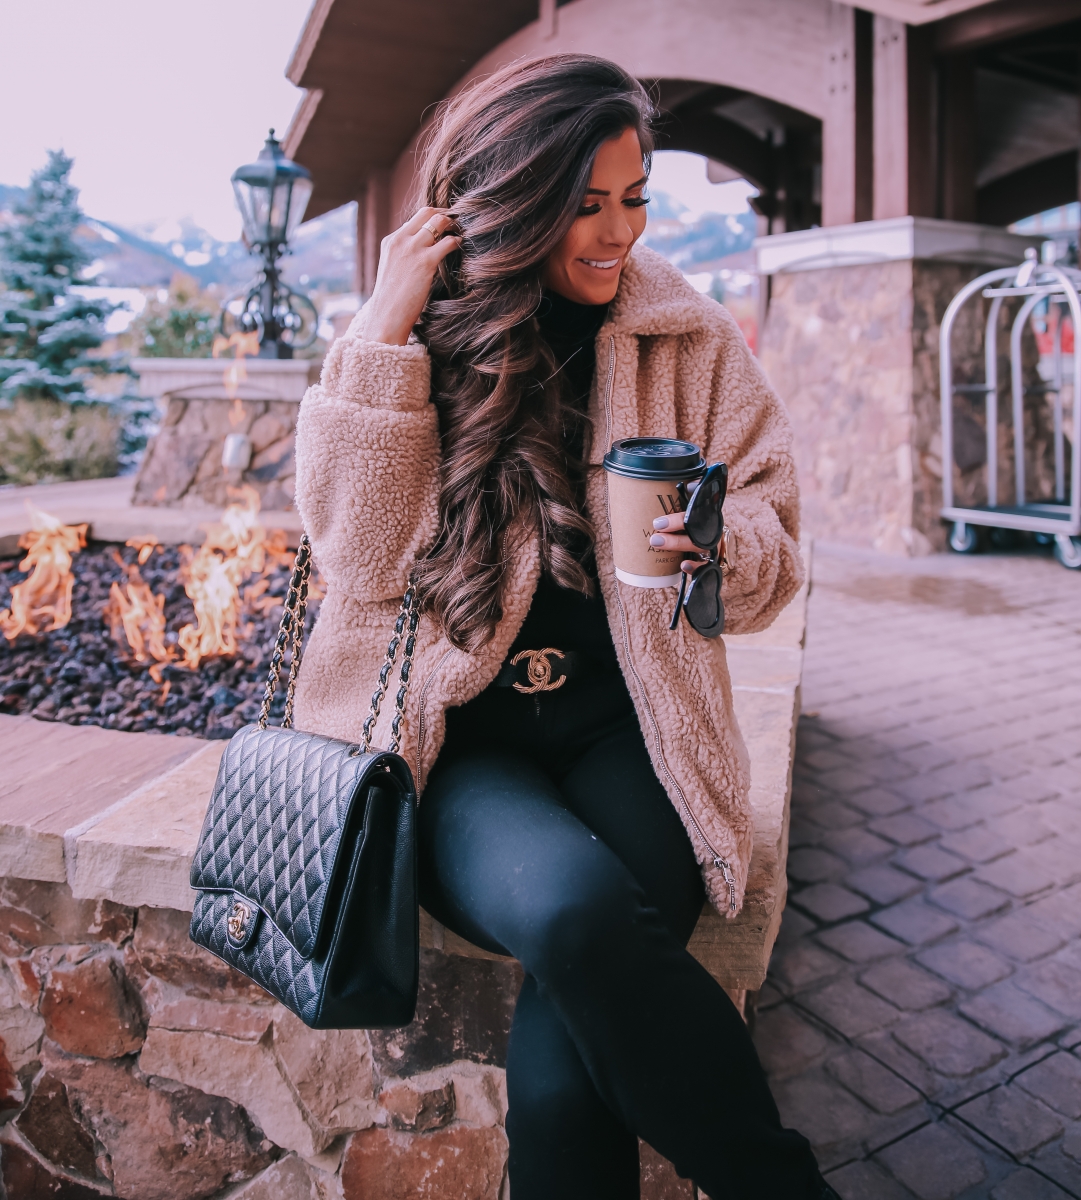 Fall fashion pinterest 2018, teddy bear coat outfit pinterest 2018, IAMGIA teddy coat, chanel belt outfit, park city travel fashion blogger, emily gemma blog, chanel classic black maxi-3 | I Am Gia Teddy Bear Jacket by popular US fashion blog, The Sweetest Thing: image of a woman standing outside next to a gas fire pit and wearing a Pixie Coat  I.AM.GIA brand: I.AM.GIA, H&M Ribbed Turtleneck Top, Nordstrom Florence Instasculpt Ankle Skinny Jeans DL1961, ShopBop Ash boots, H&M Large Earrings, Nordstrom Lip Cheat Lip Liner CHARLOTTE TILBURY, Chanel belt, Chanel purse, and Nordstrom MAC Matte Lipstick MAC COSMETICS.